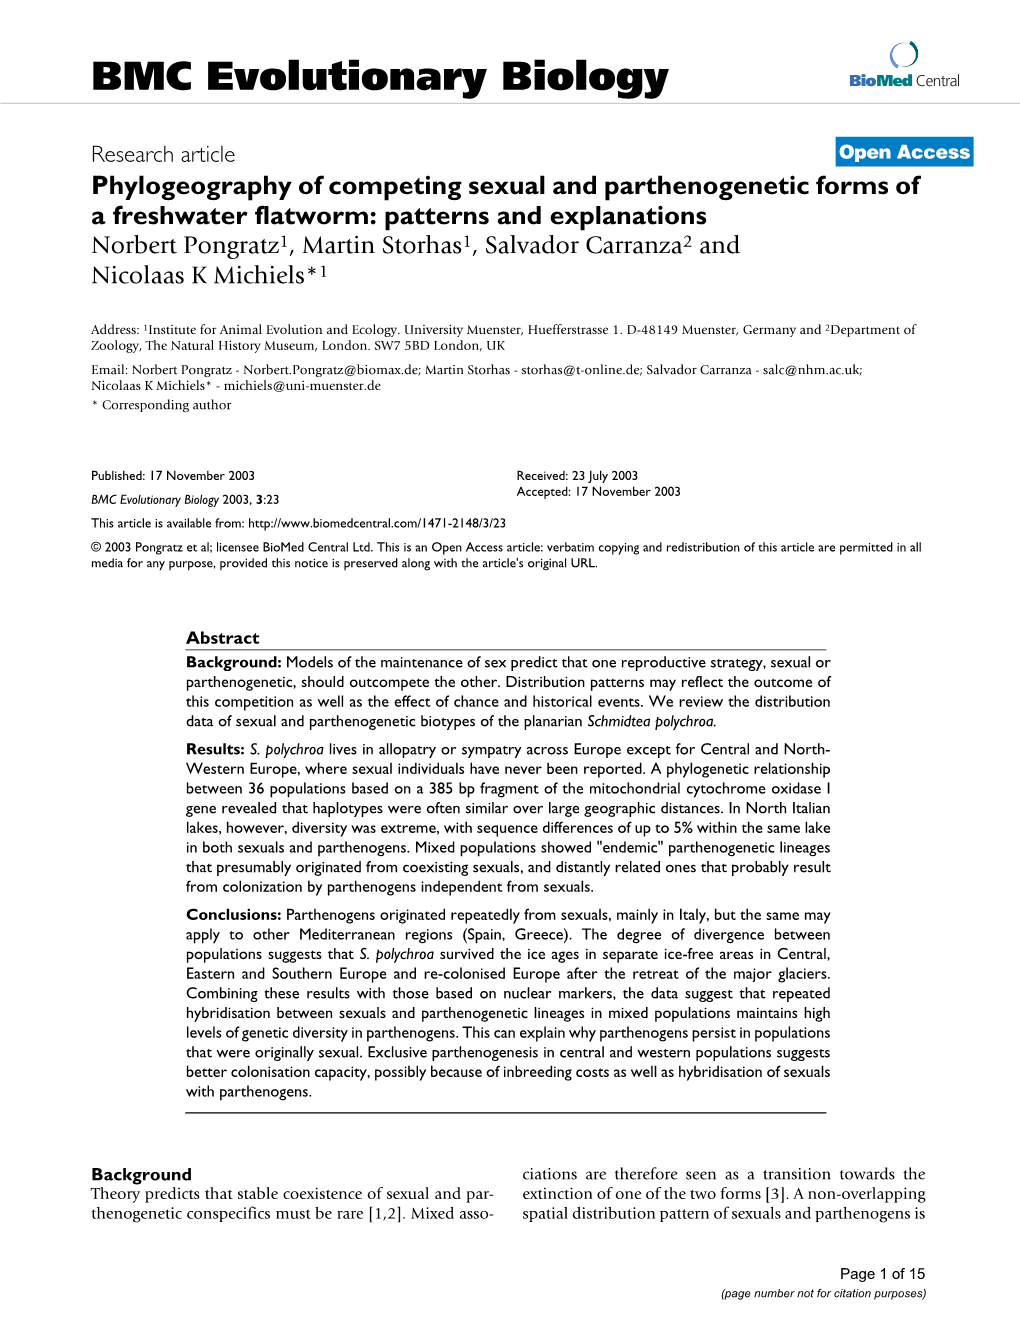 Phylogeography of Competing Sexual and Parthenogenetic Forms of A